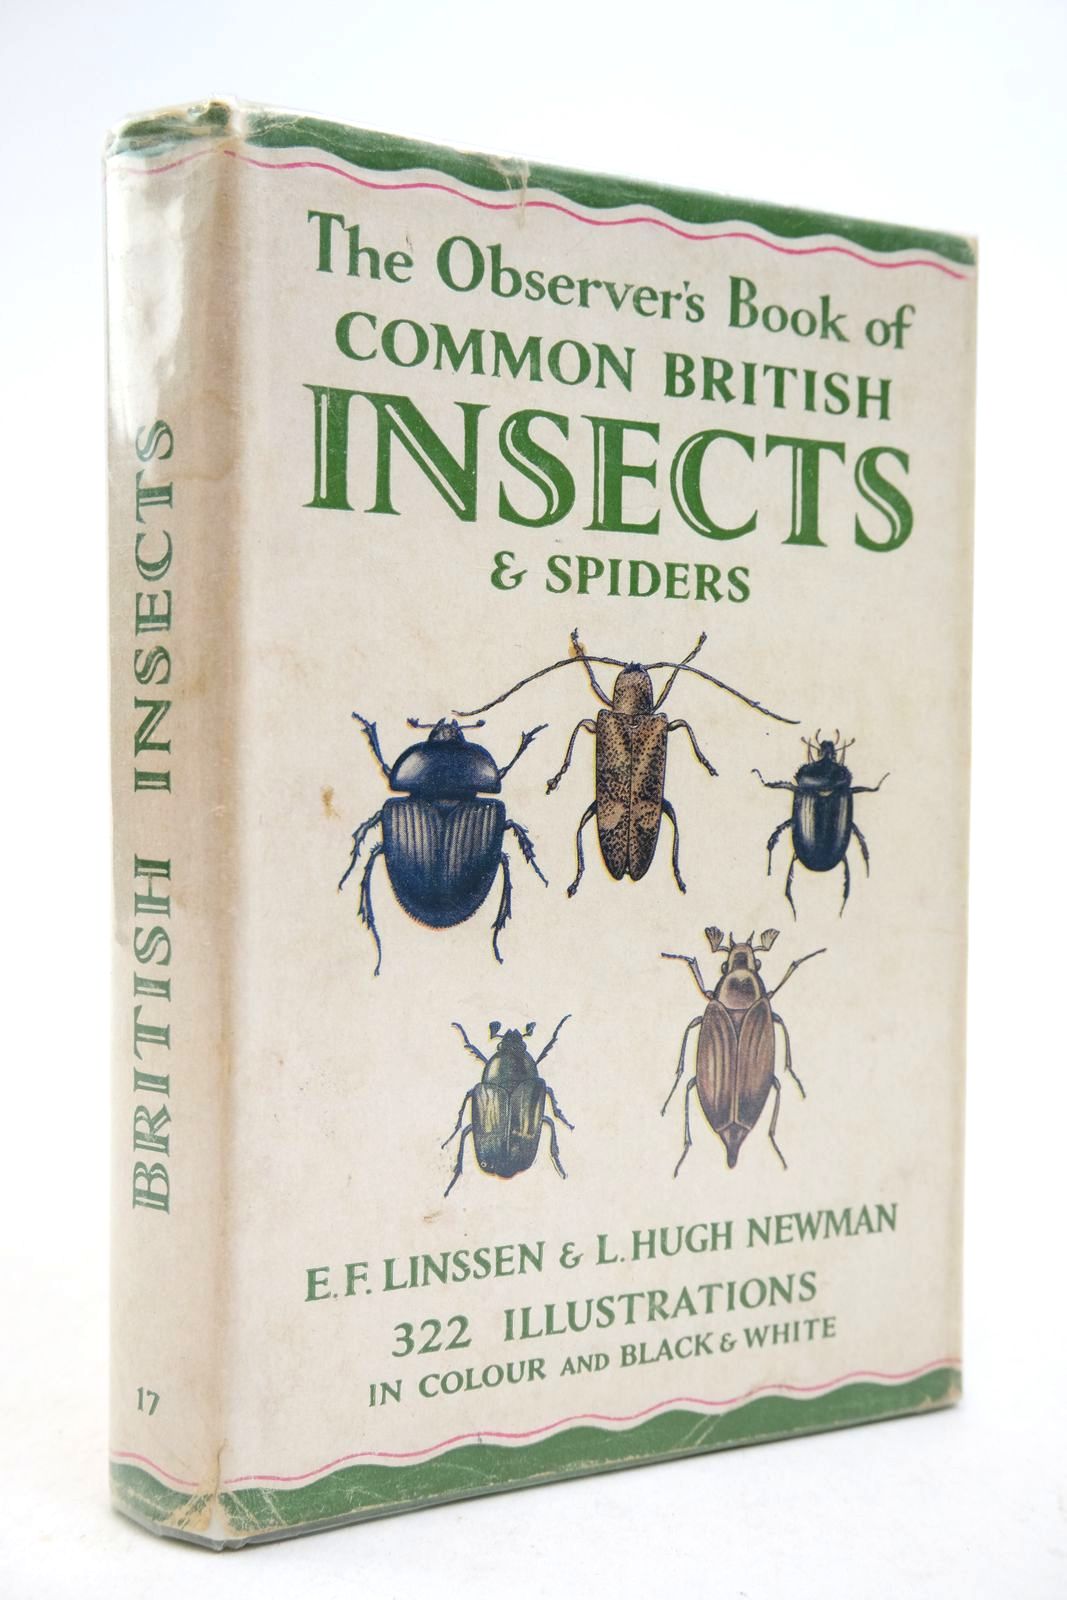 Photo of THE OBSERVER'S BOOK OF COMMON BRITISH INSECTS AND SPIDERS written by Linssen, E.F.
Newman, L. Hugh published by Frederick Warne & Co Ltd. (STOCK CODE: 2140429)  for sale by Stella & Rose's Books